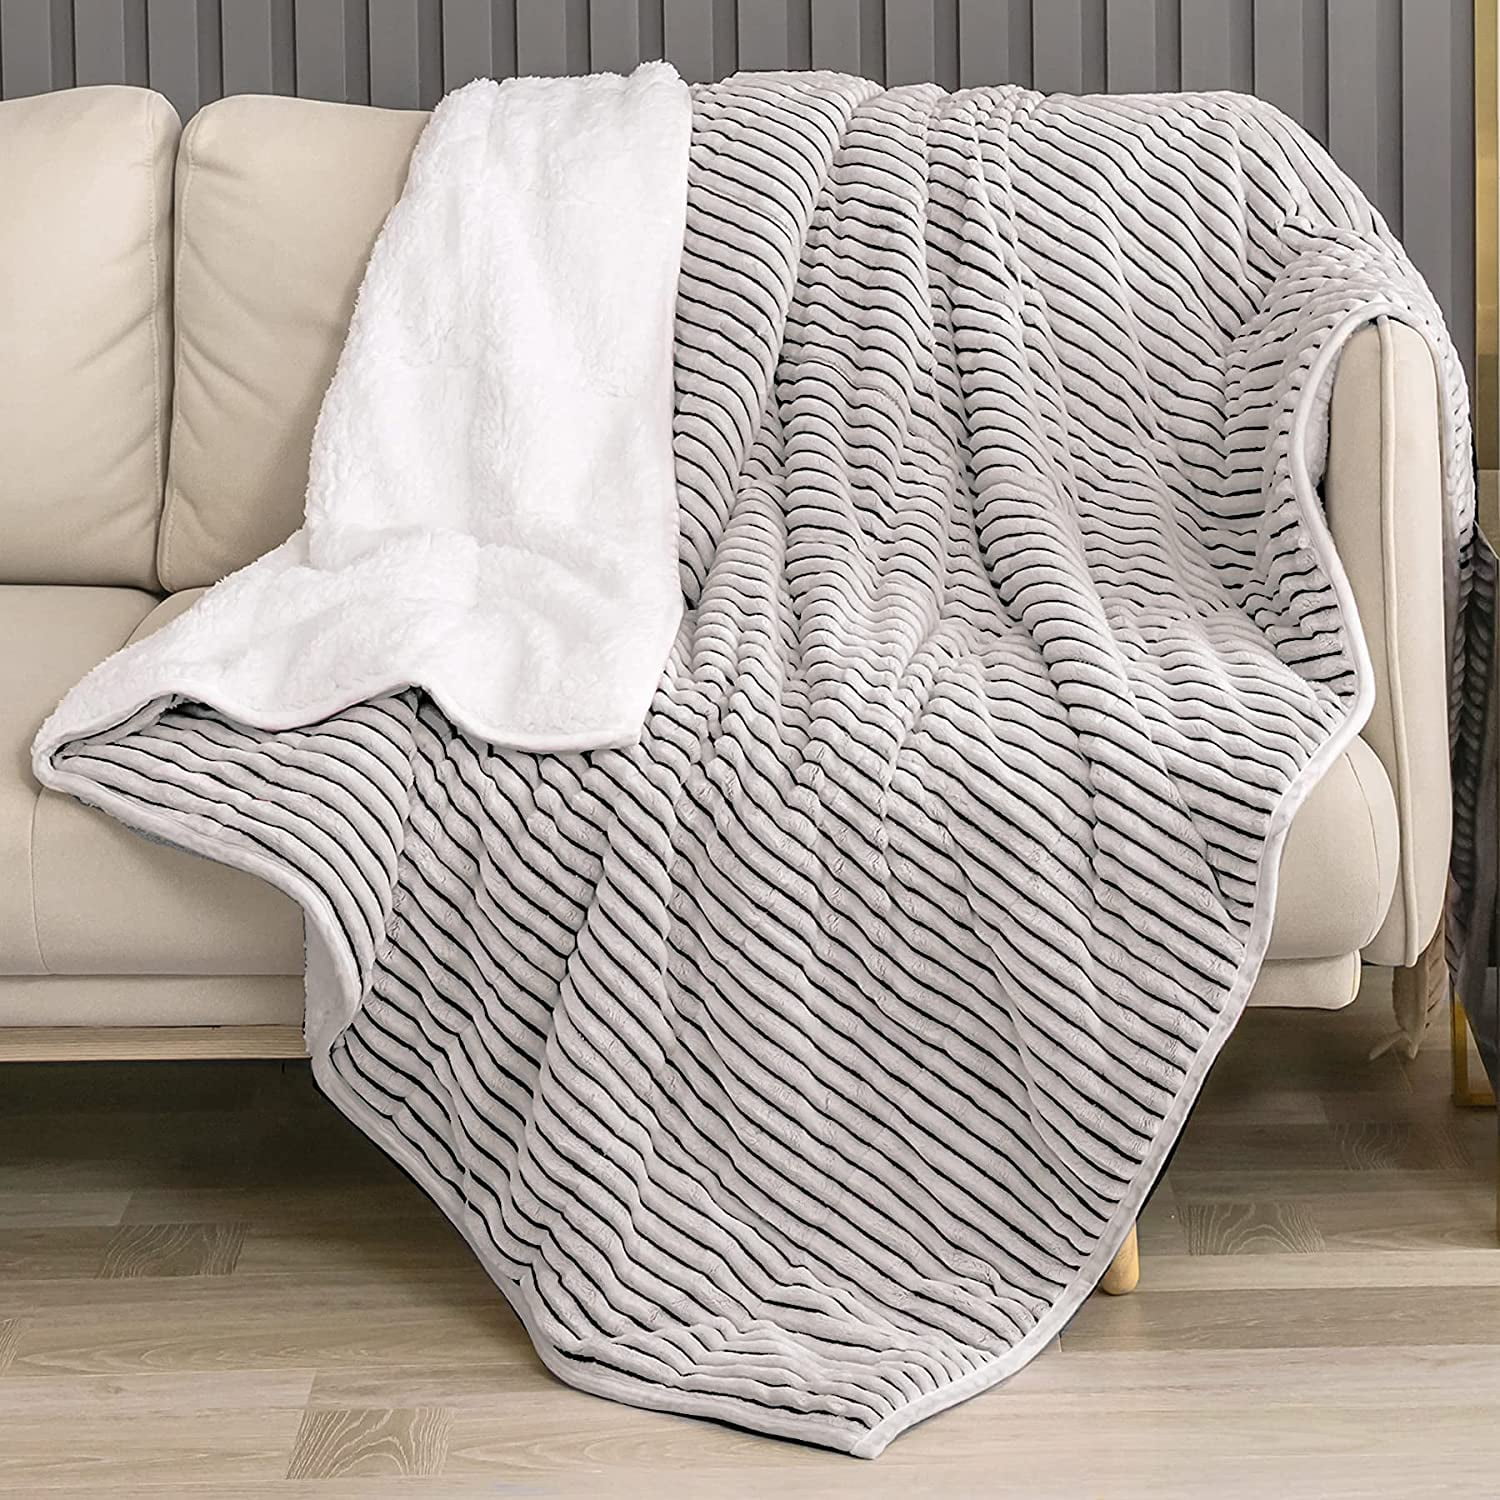 70x90 in Cotton Blended Striped Throw Blanket for Couch Blankets & Throws Outdoor Blanket Heated Blanket Travel Blanket Mexican Blanket Throw Blankets for Bed Hospital Patient Bath Blanket